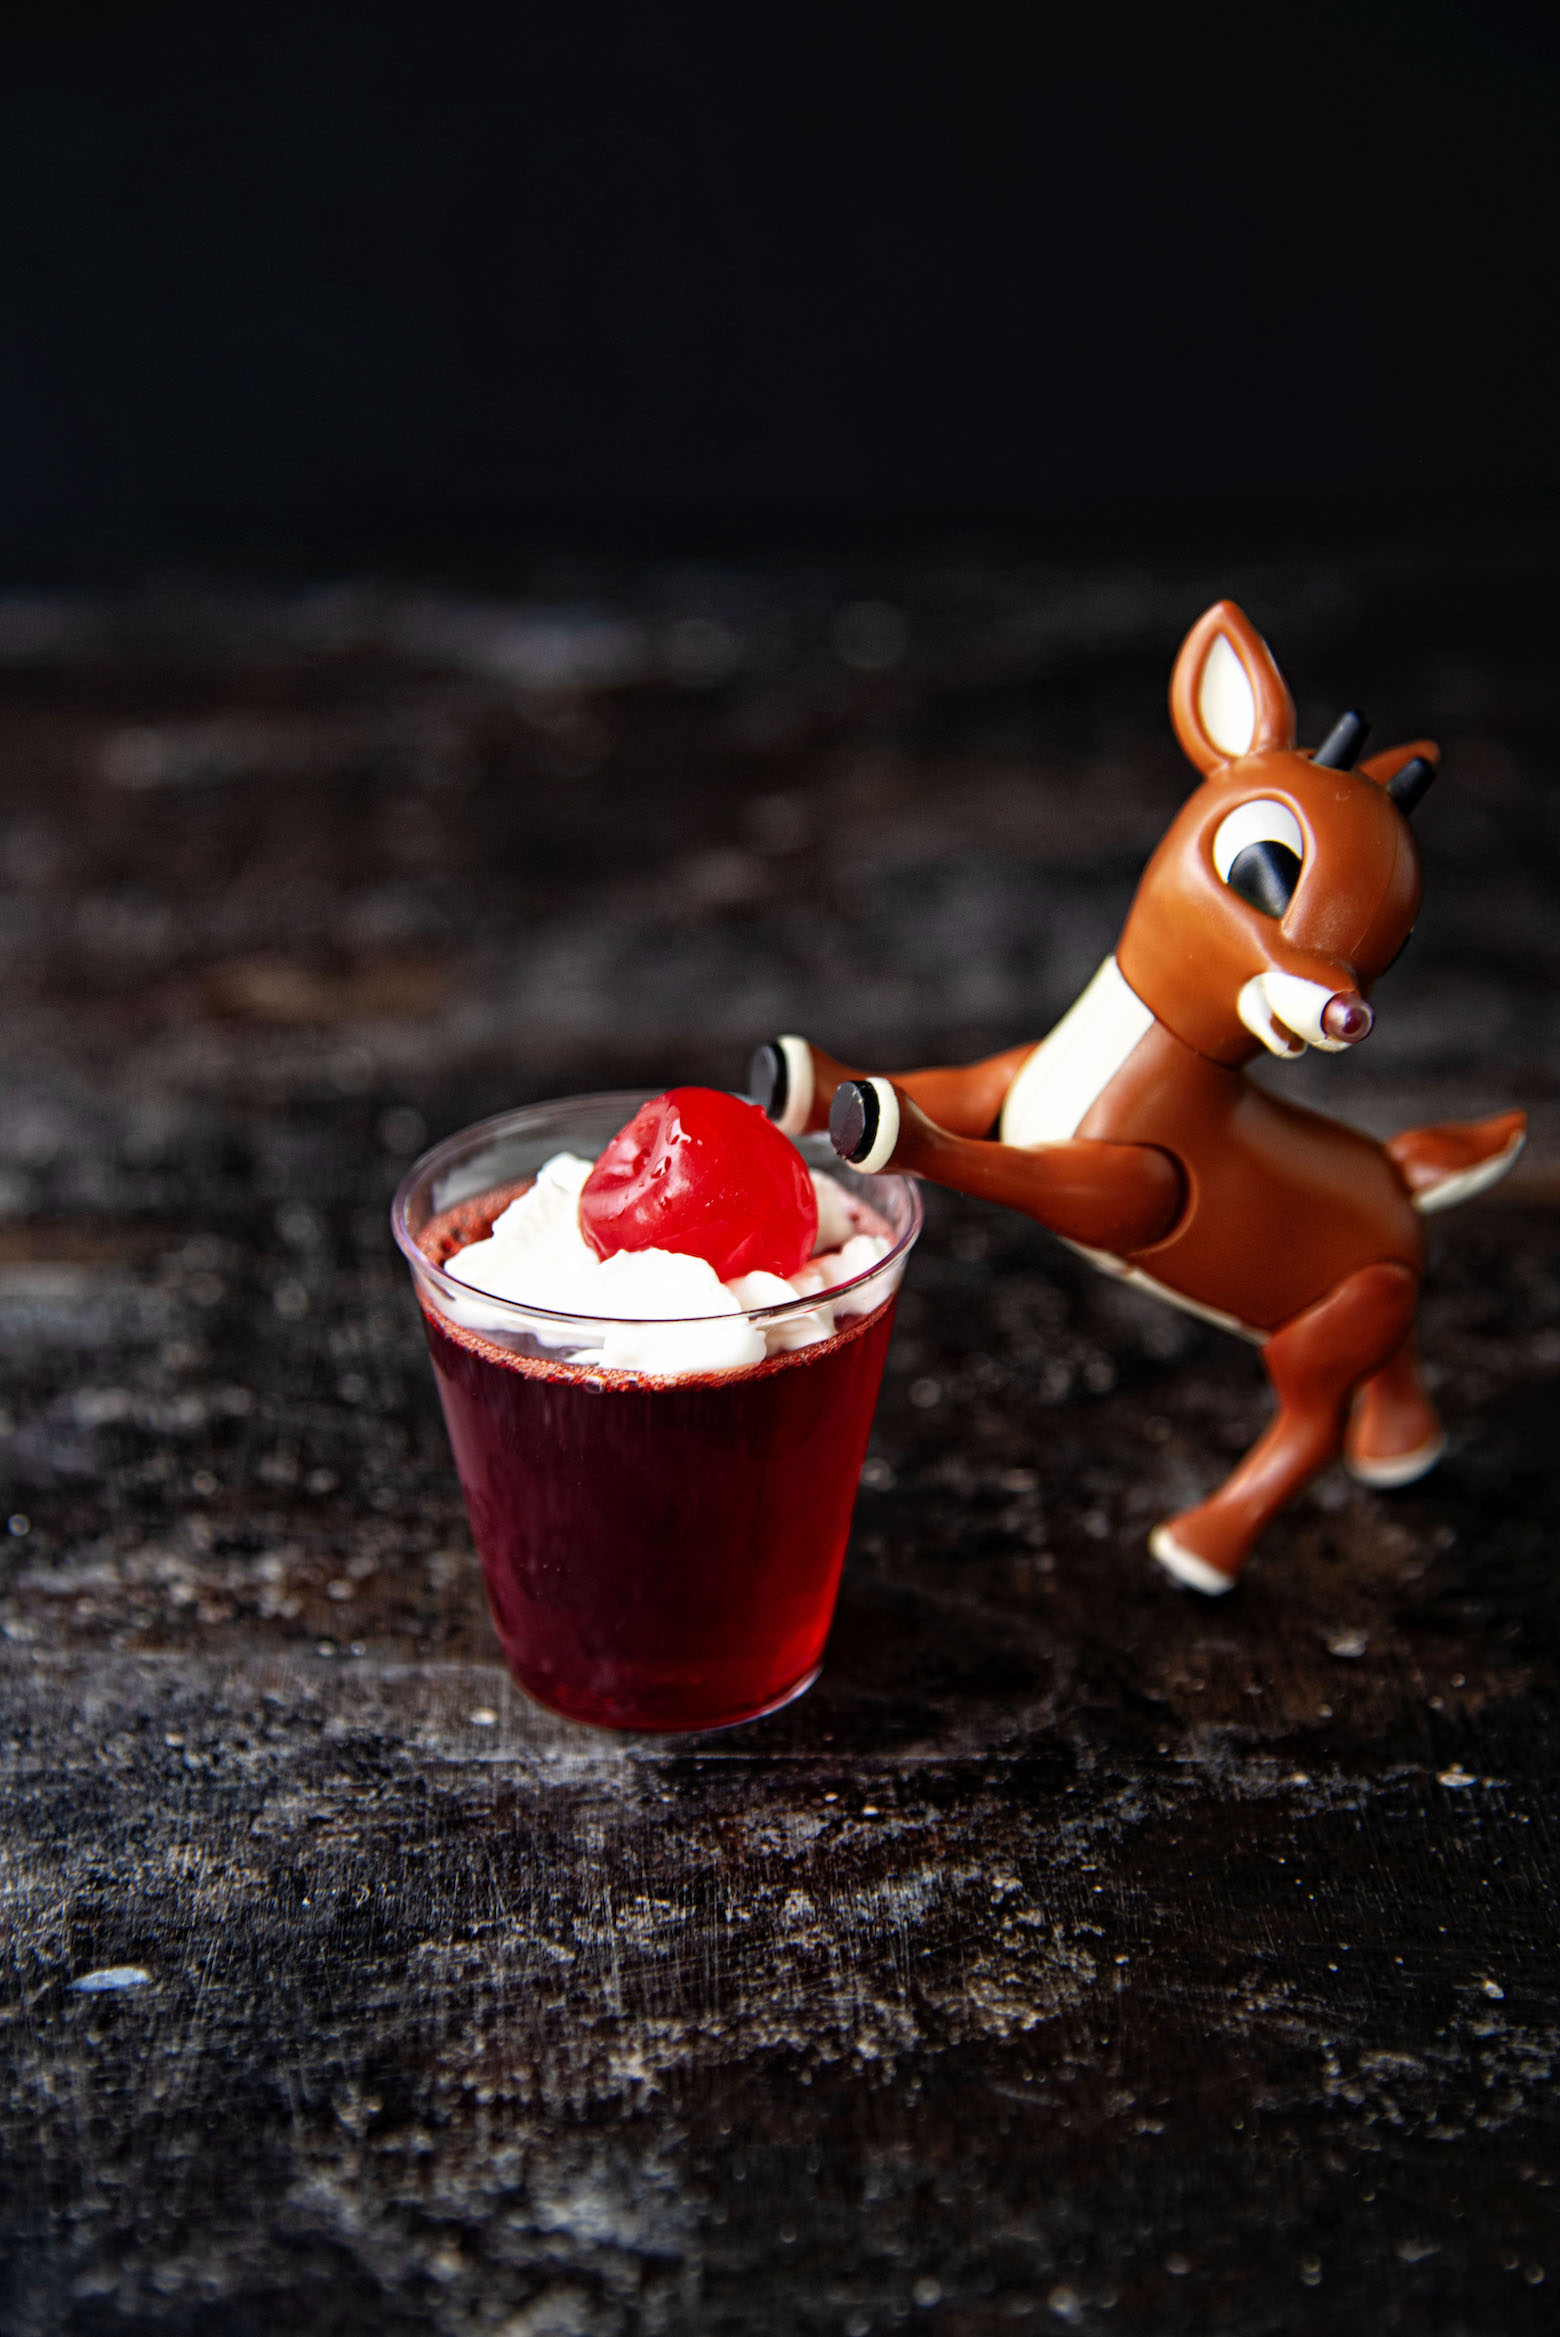 Rudolph having his front hooves up on the jello shot.  